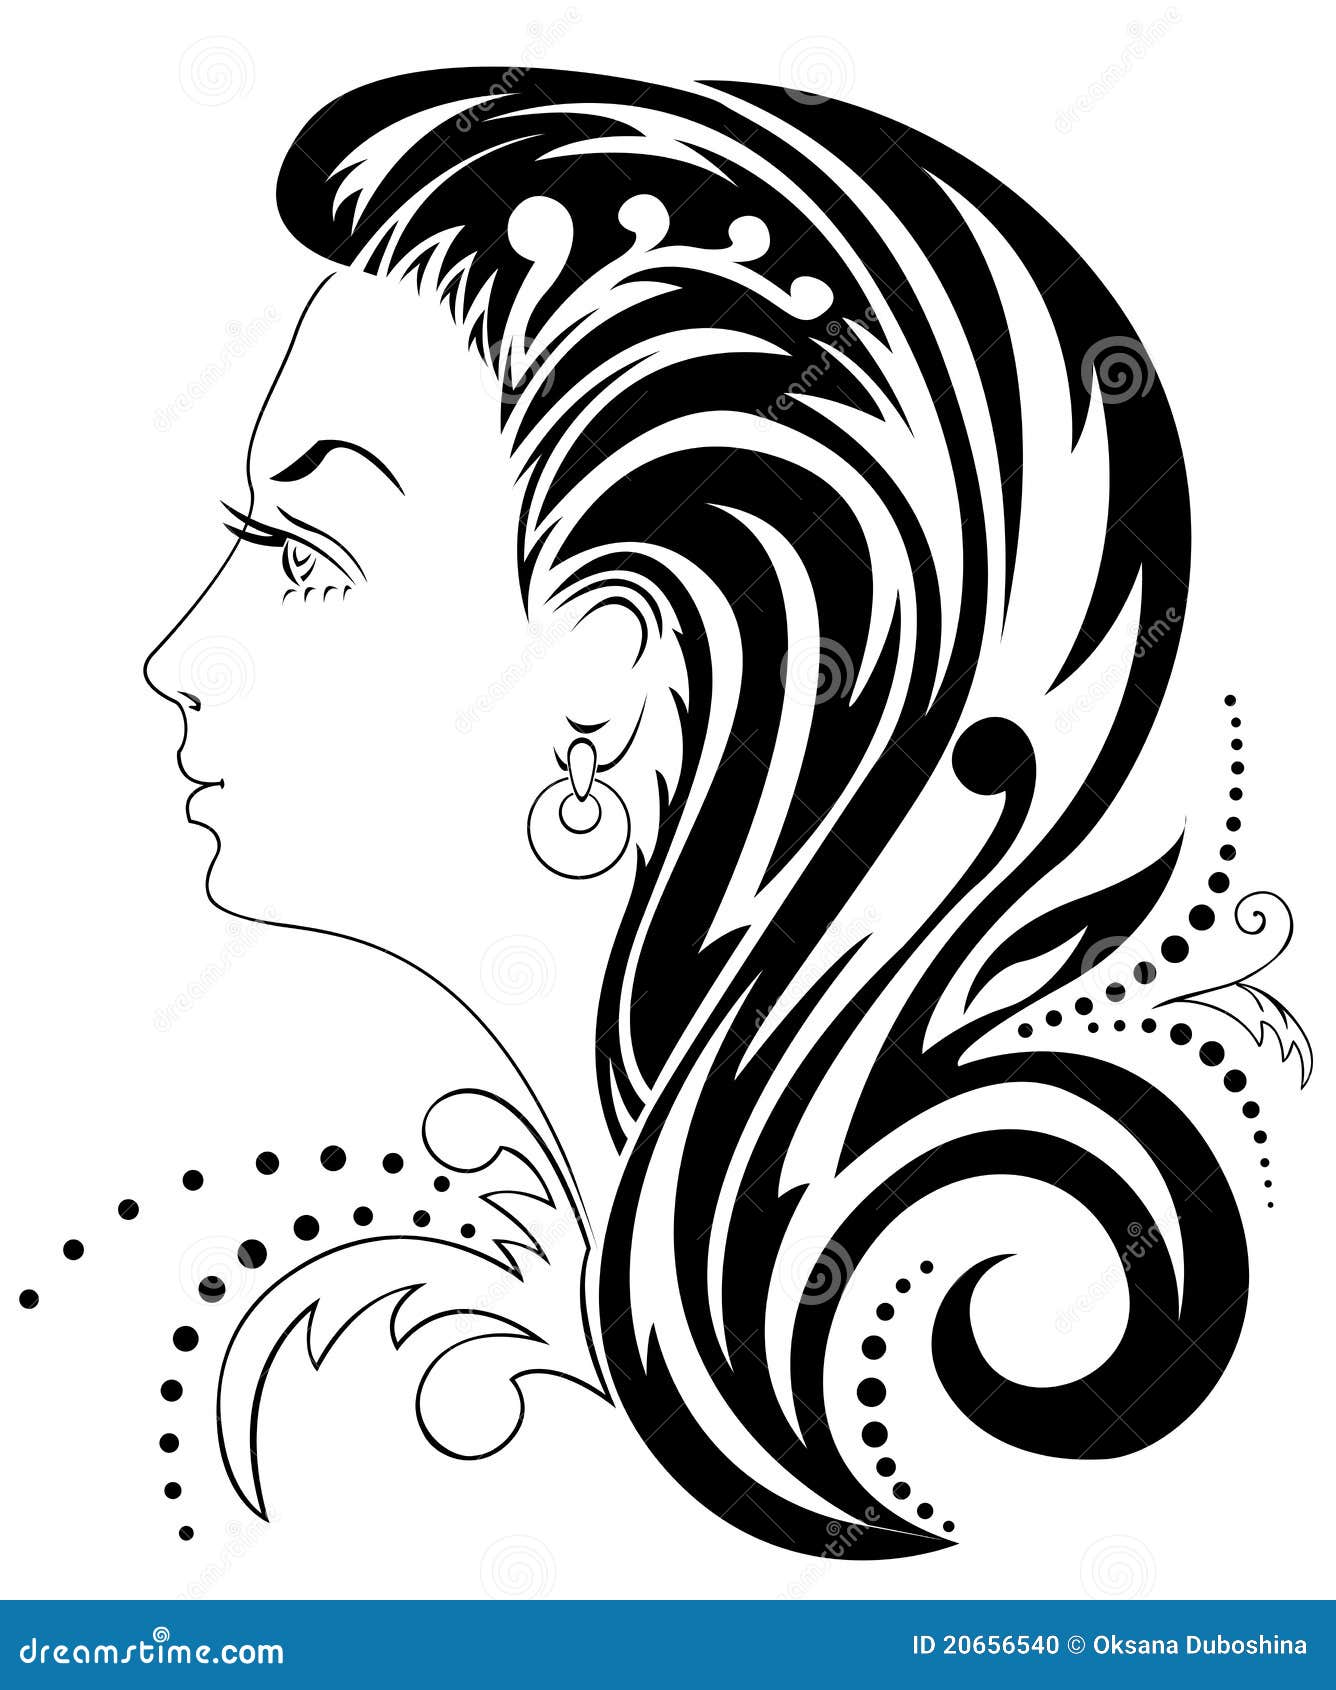 Silhouette Of A Female Head Stock Vector - Image: 20656540